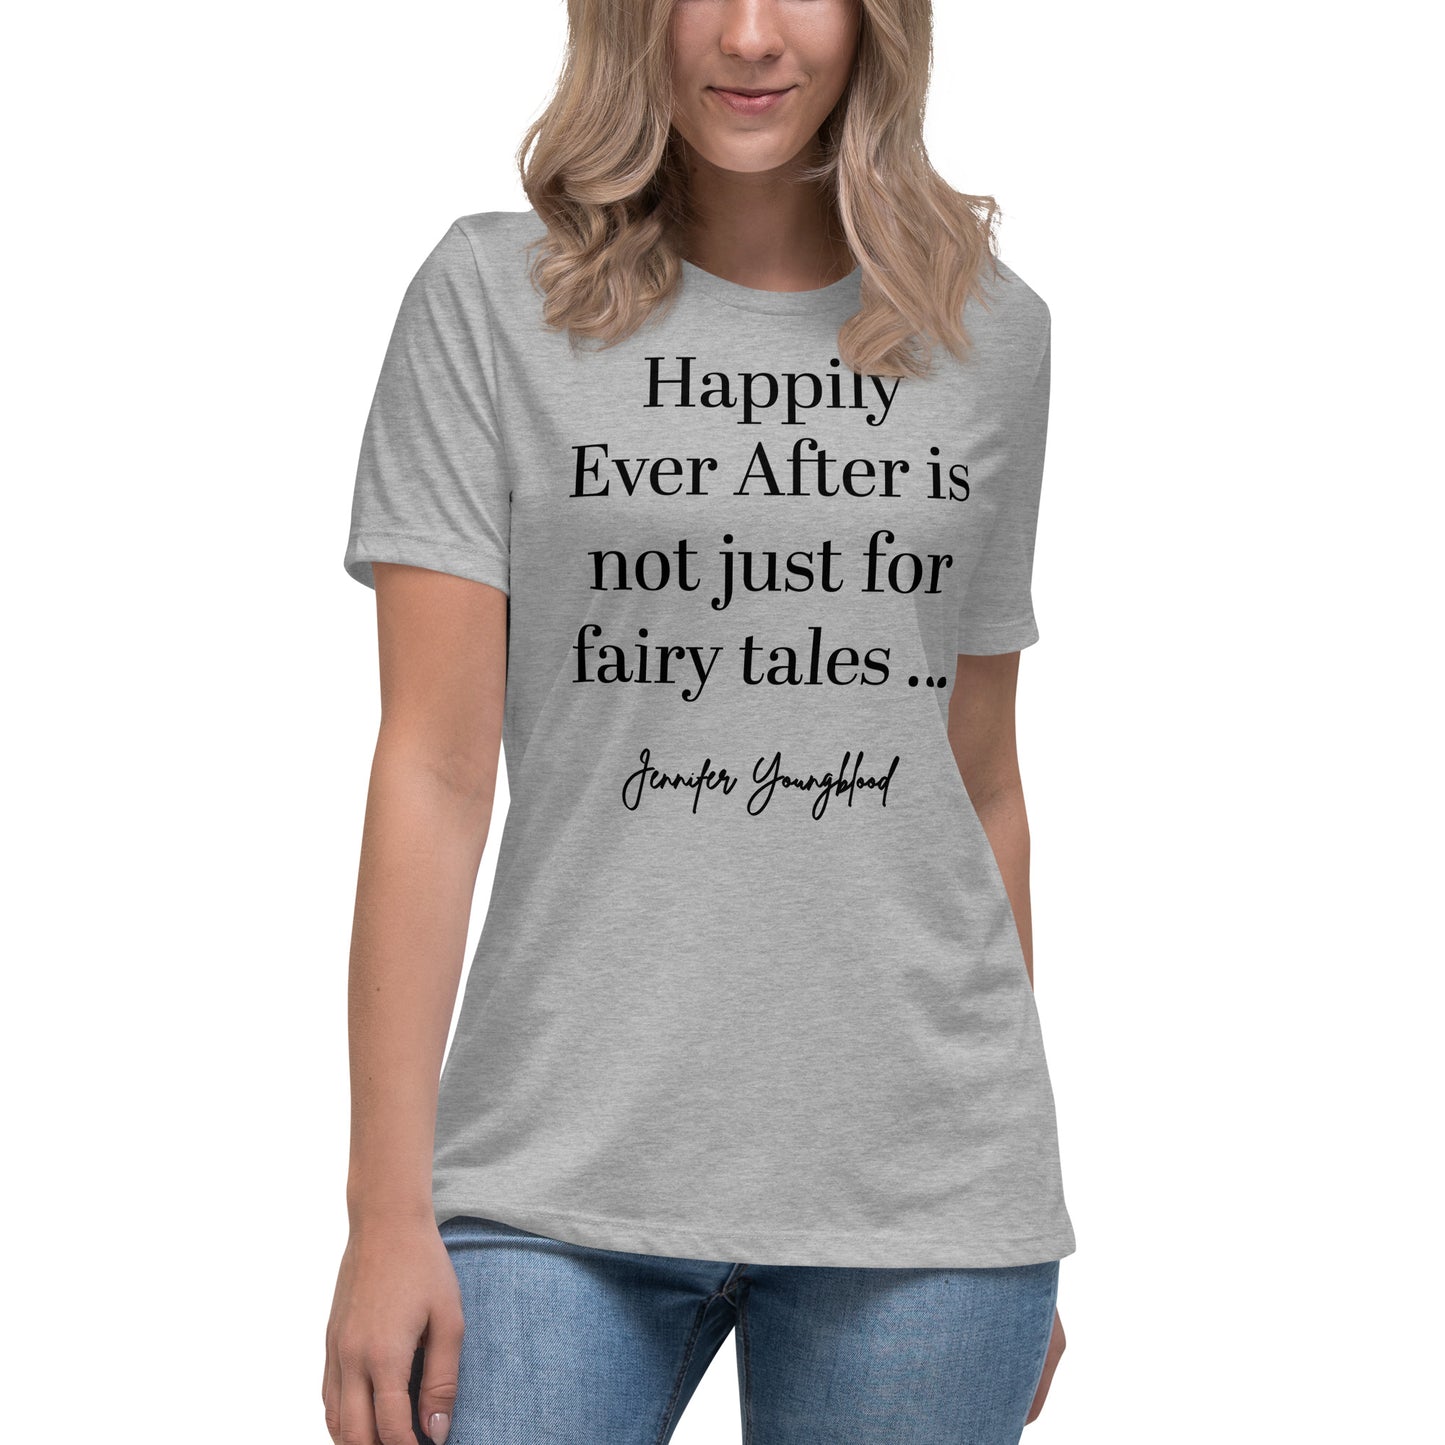 Happily Ever After Is Not Just For Fairy Tales – T-Shirt